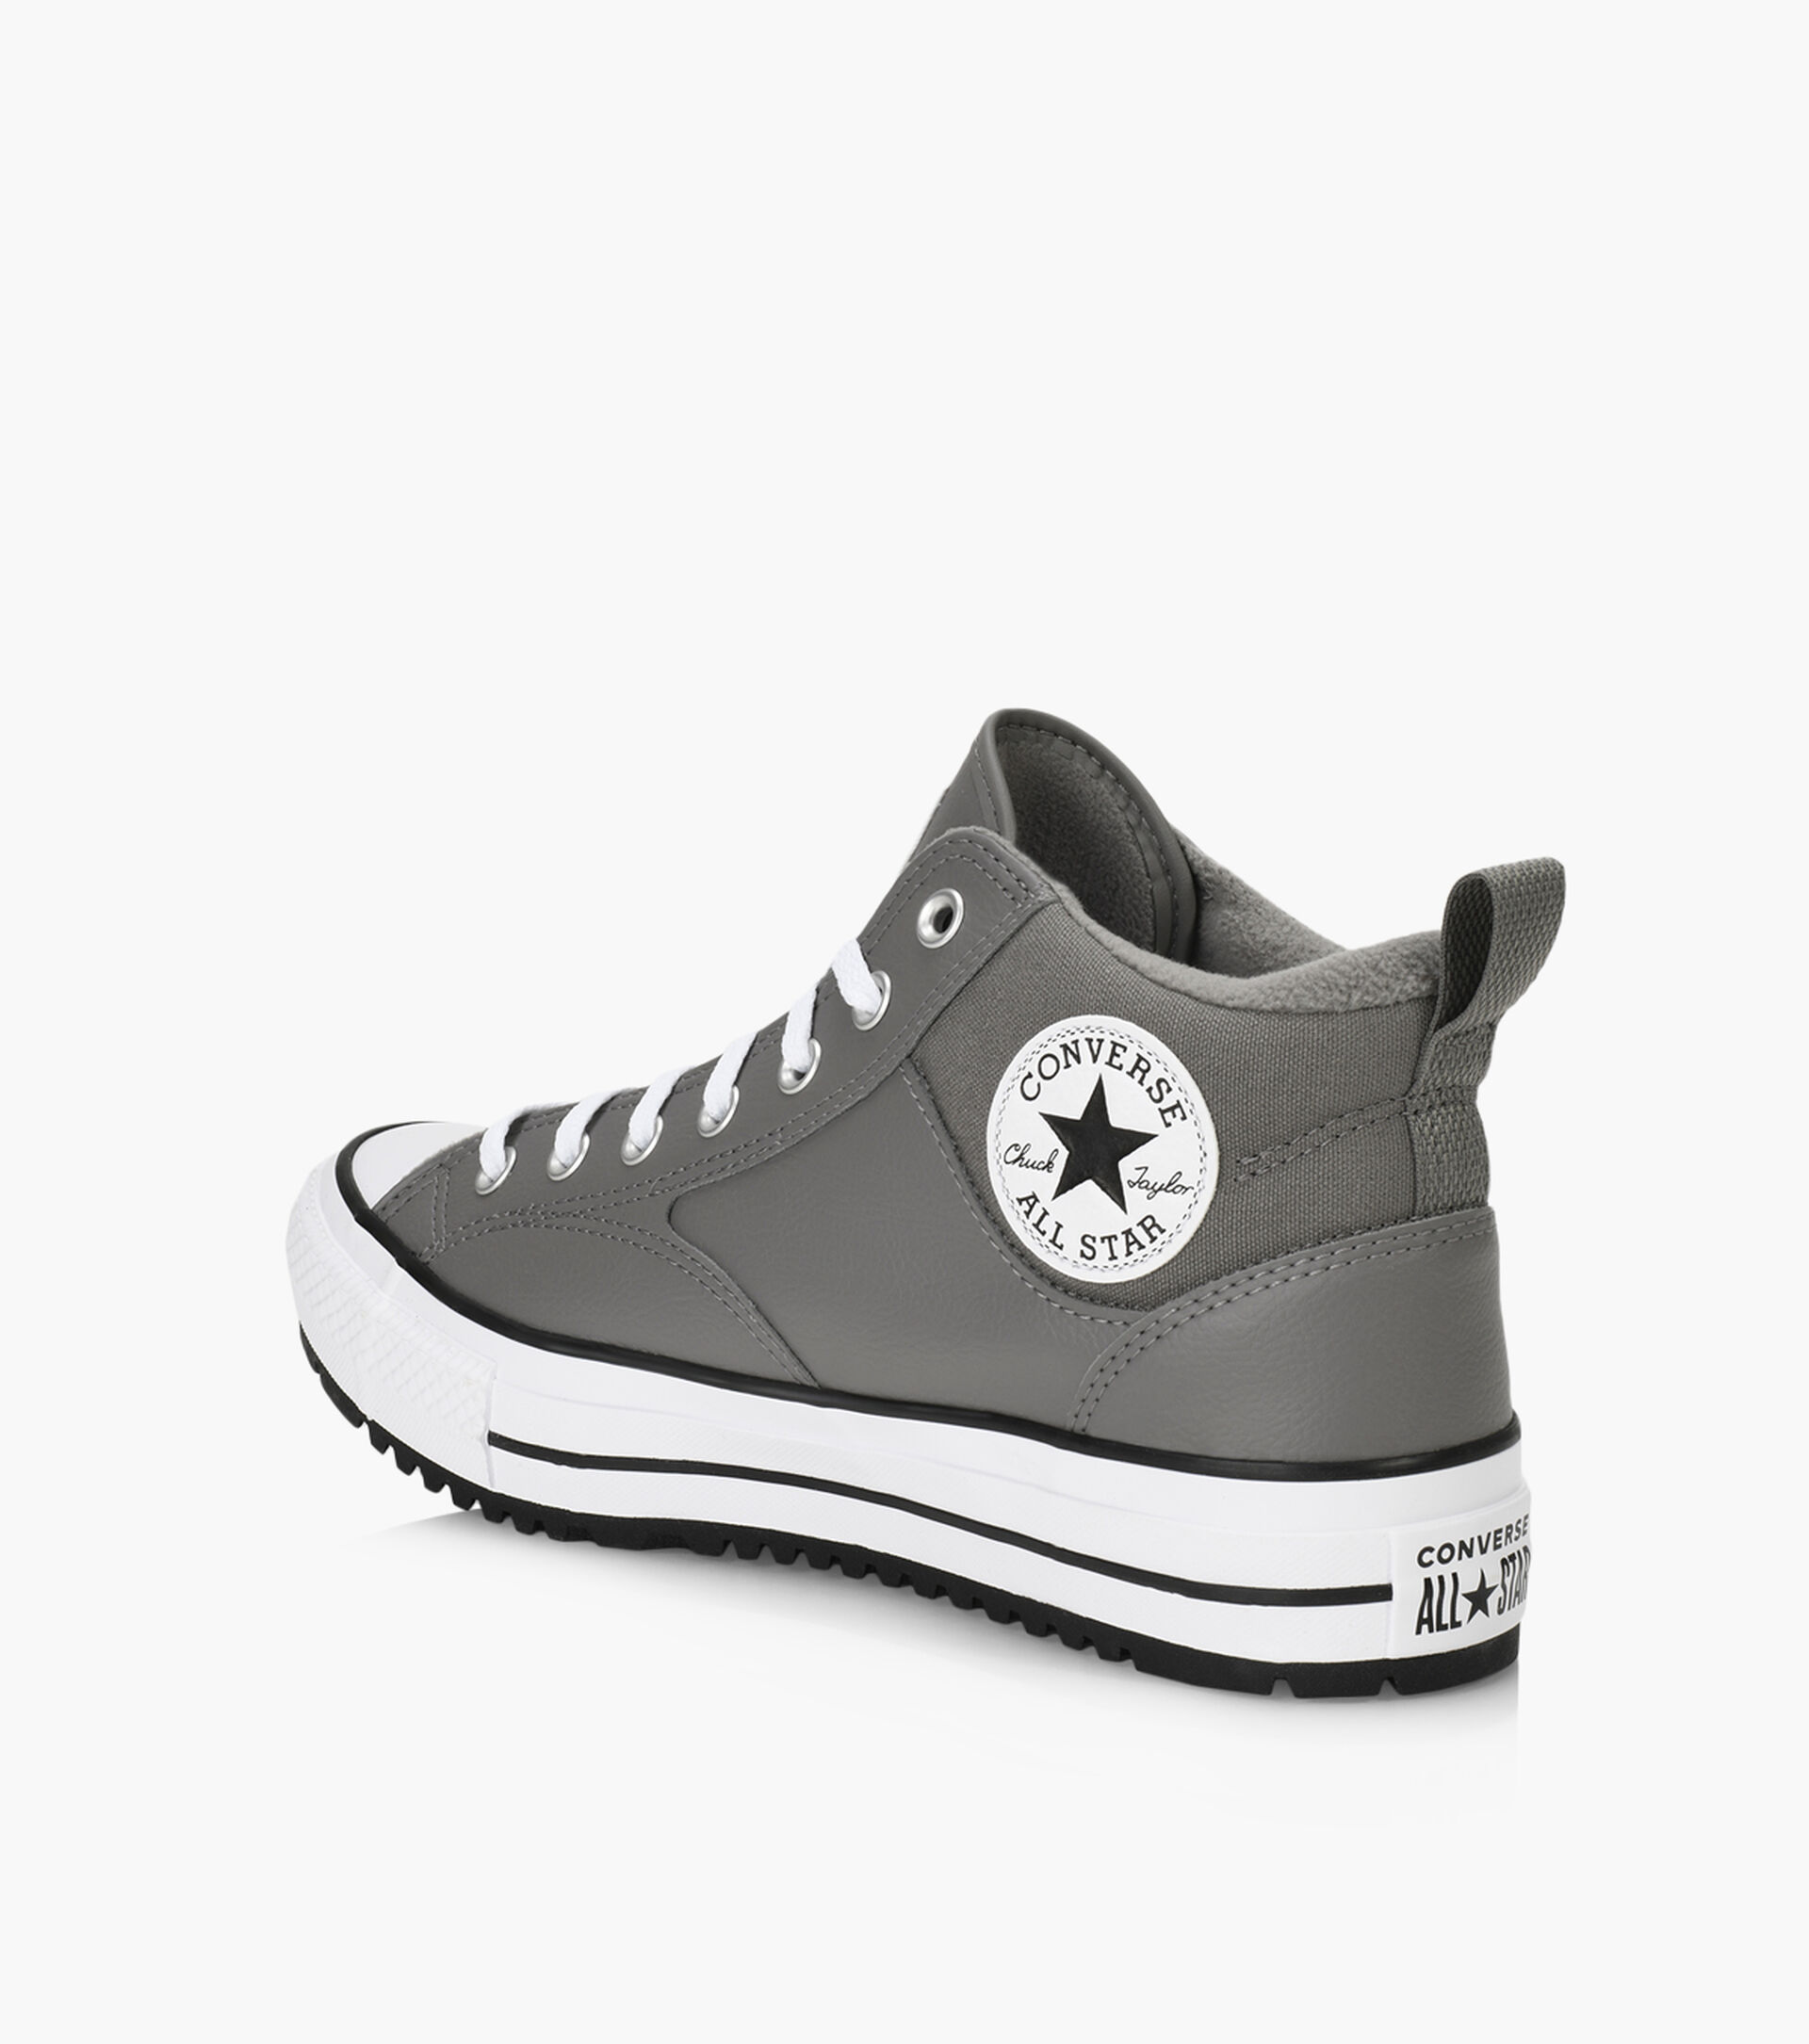 CONVERSE CHUCK TAYLOR ALL STAR MALDEN STREET BOOT - Leather | Browns Shoes